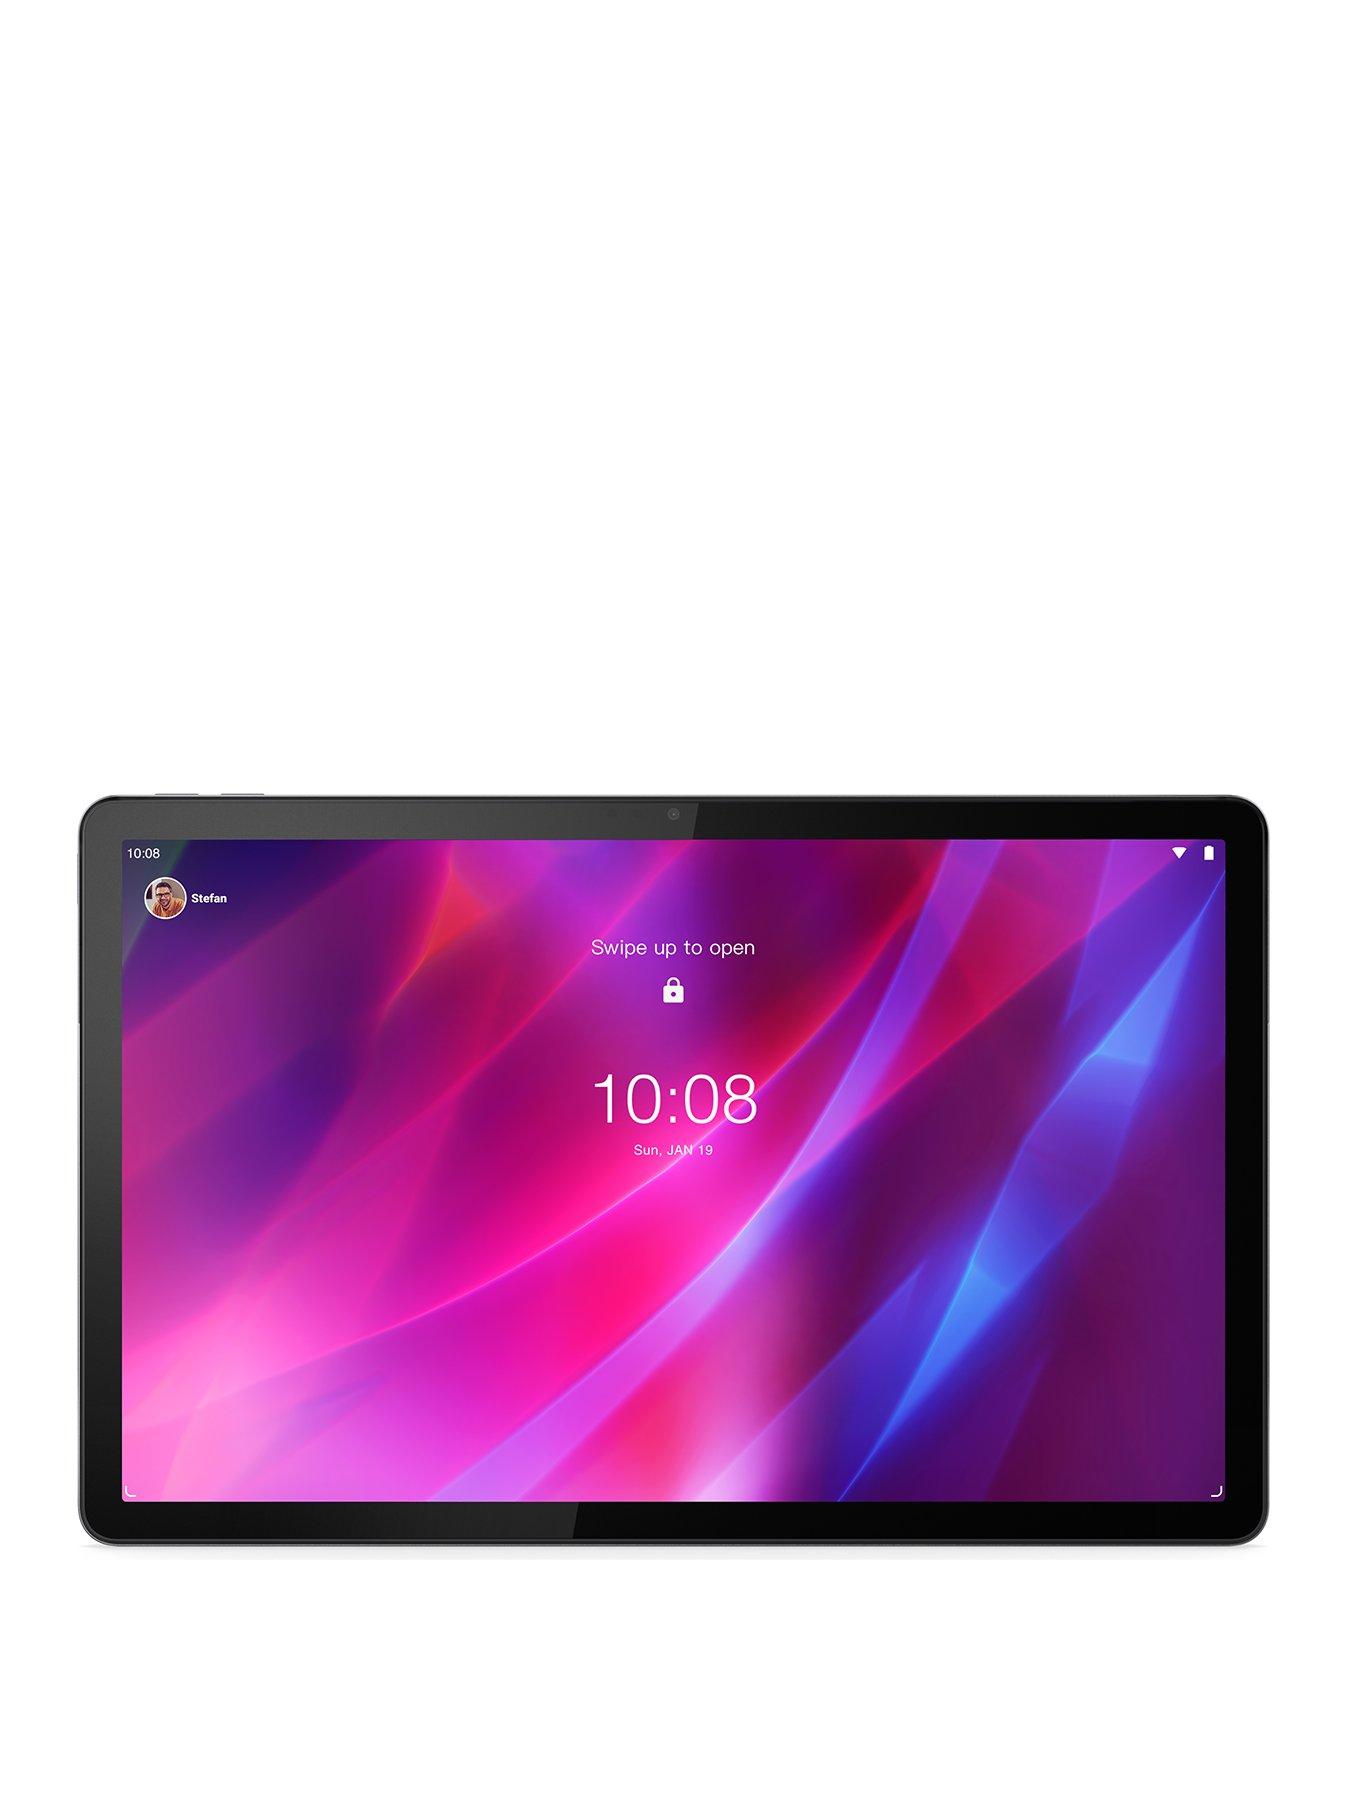 how to image a lenovo tablet using ghost 3.1